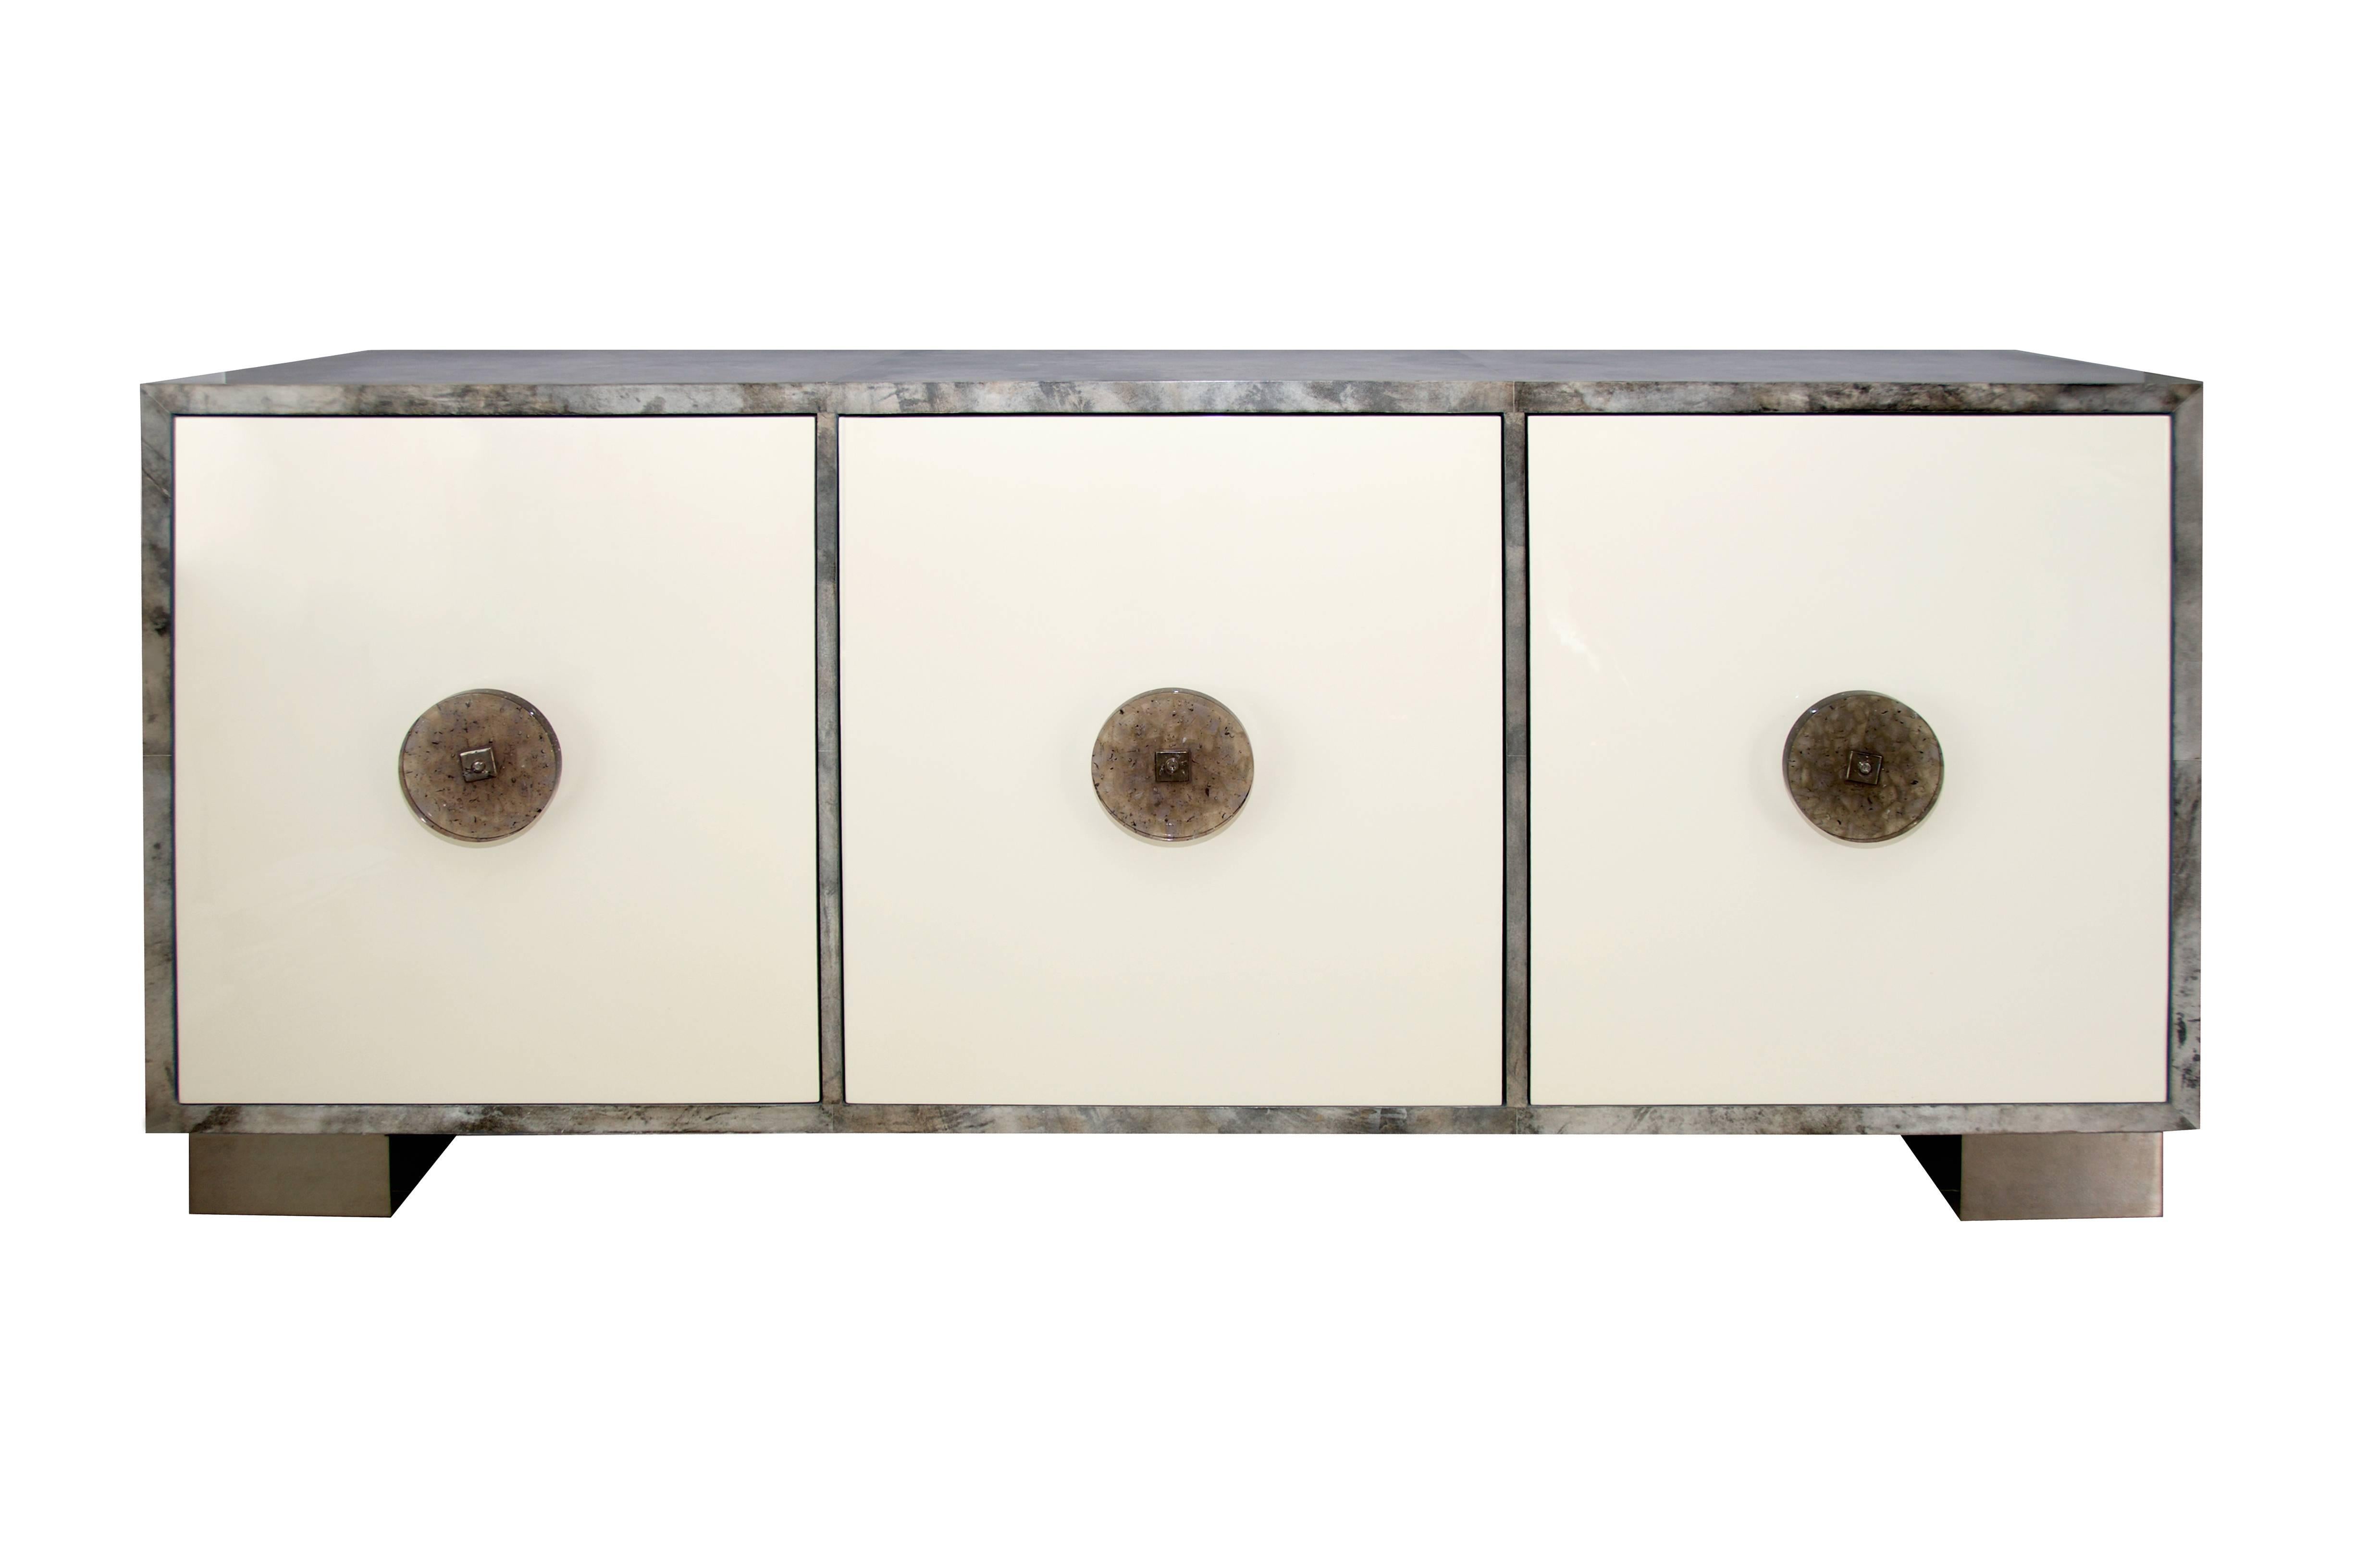 Ultra luxe custom sideboard from the Modern Envy collection by On Madison. Goatskin covered sideboard with lacquer doors, bespoke resin handles on polished stainless steel legs. Custom sizes and colors available. 11-12 week production time.
